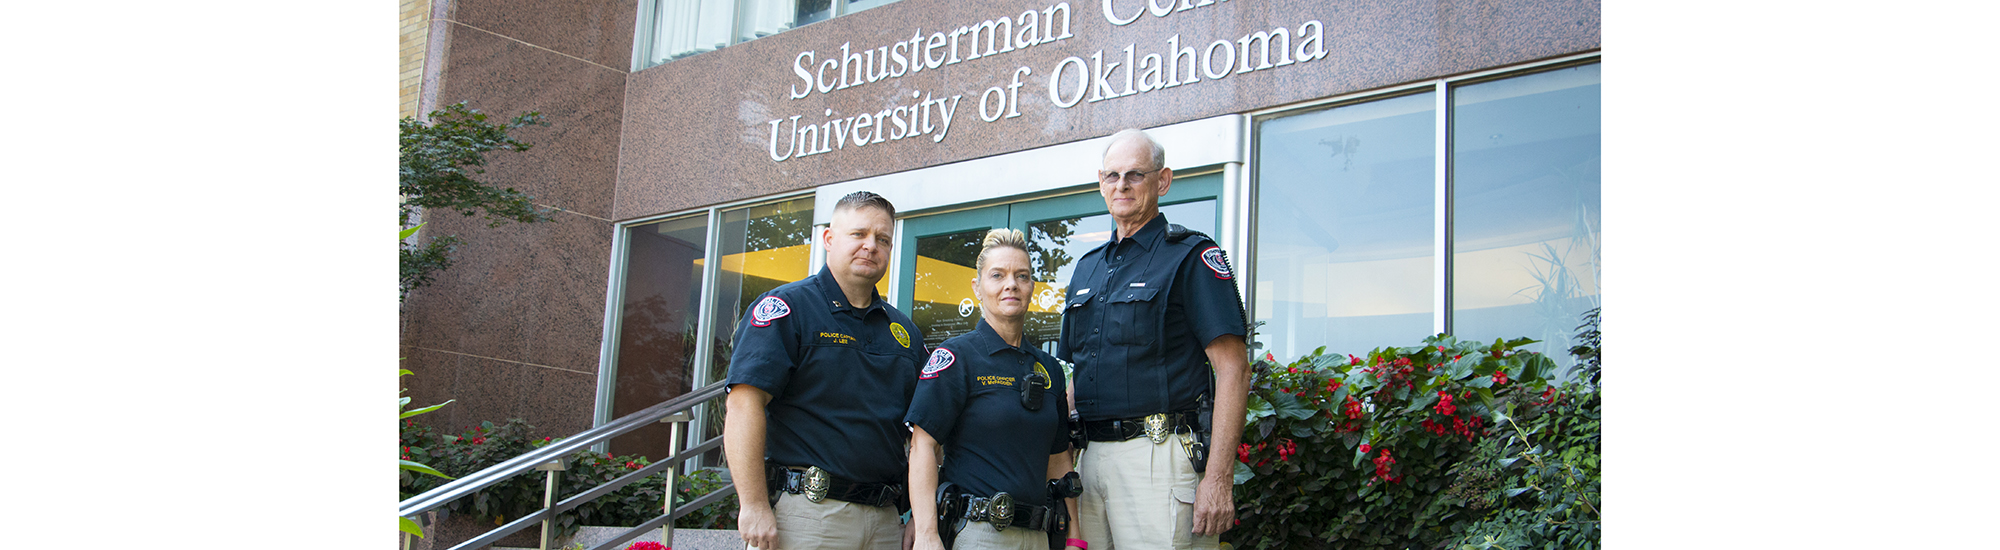 OUTPD Officers in front of Schusterman Center, University of Oklahoma